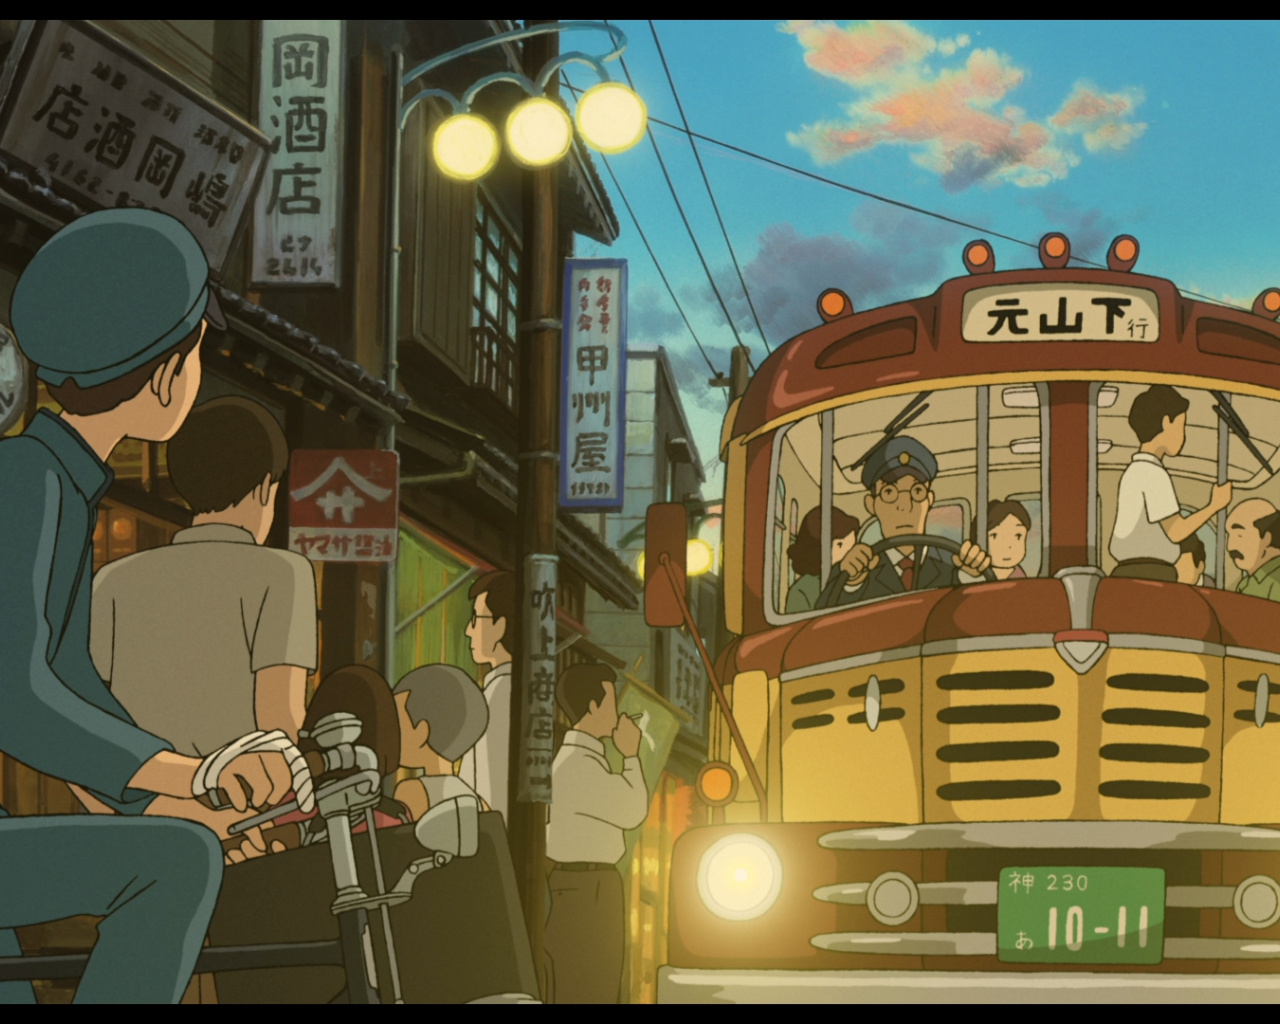 From Up On Poppy Hill, the guy on the bike